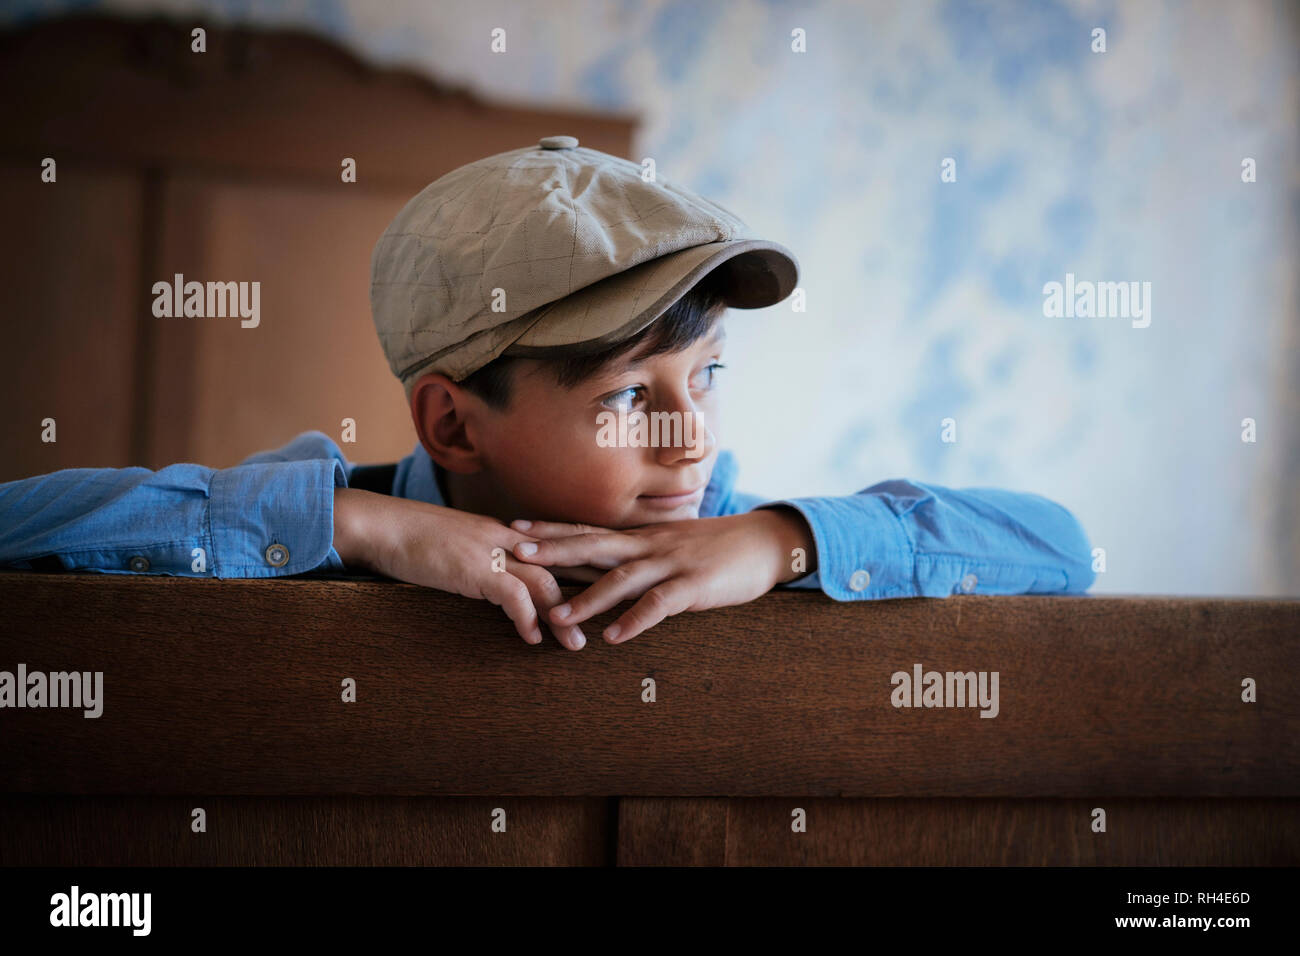 Thoughtful boy in cap looking away on bed Stock Photo